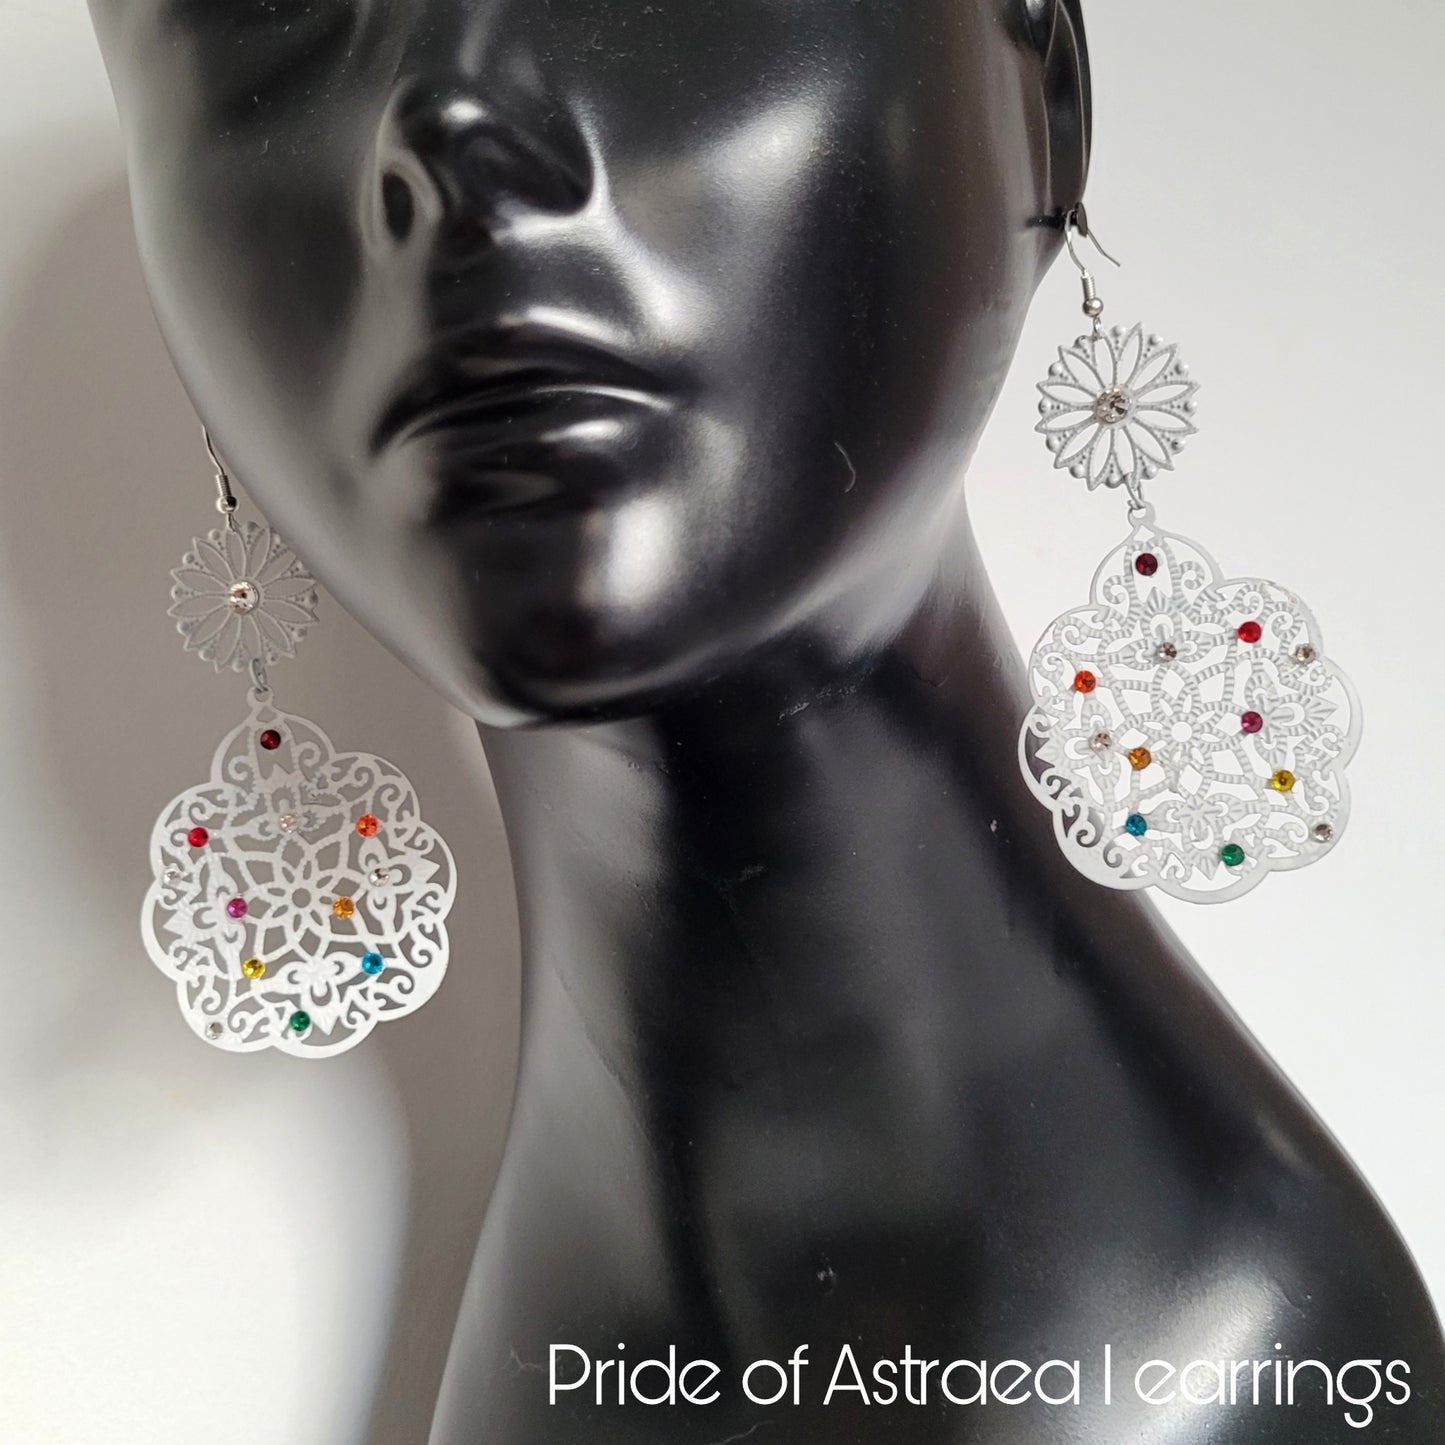 Deusa ex Machina collection: The Pride of Astraea earrings